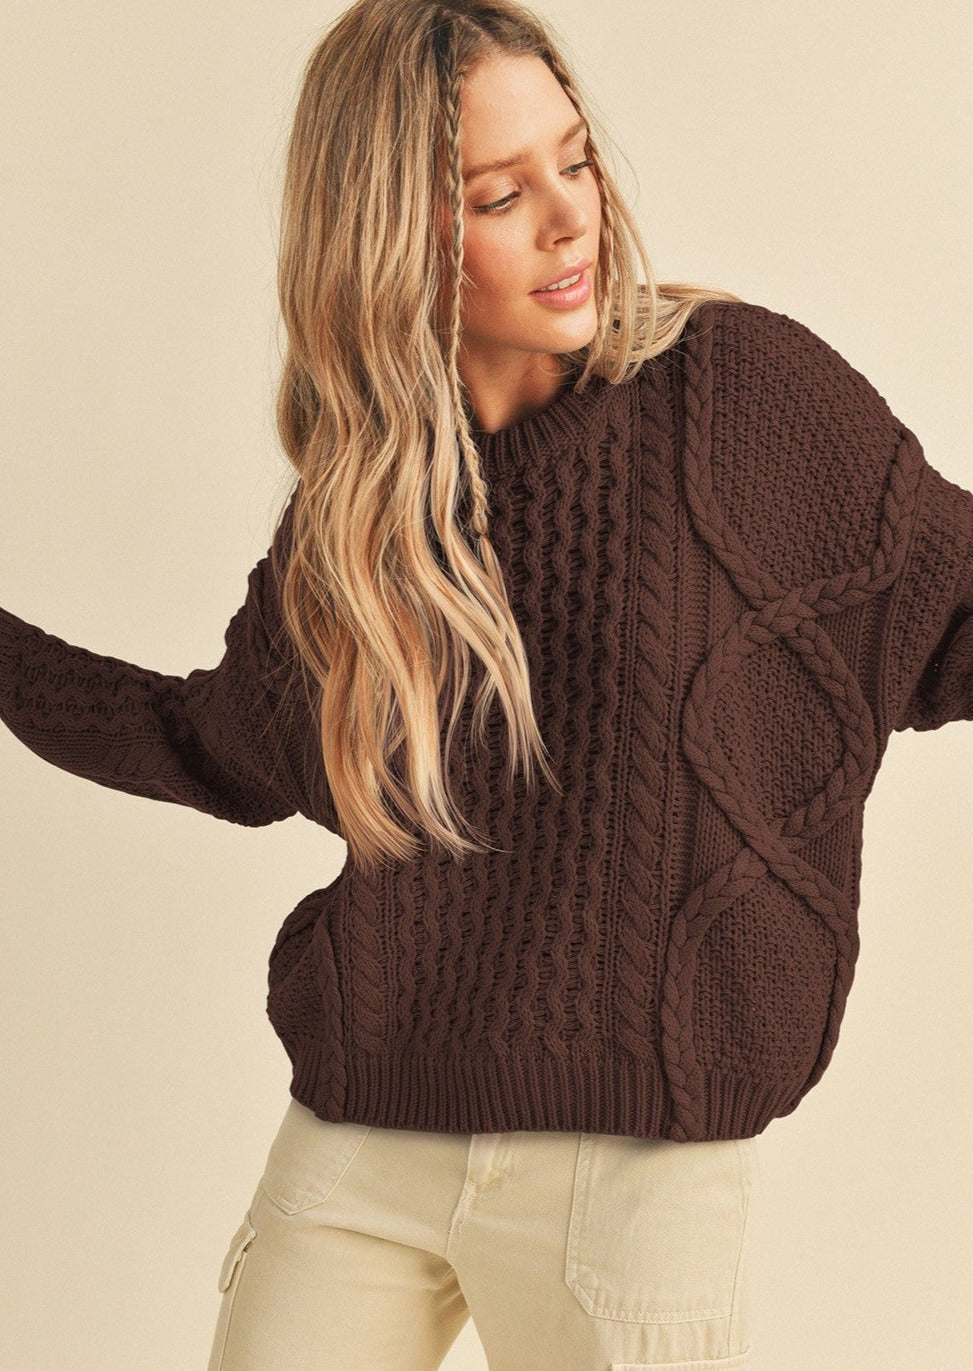 Relaxed Fit Braided Cable Knit Sweater- Chocolate Brown